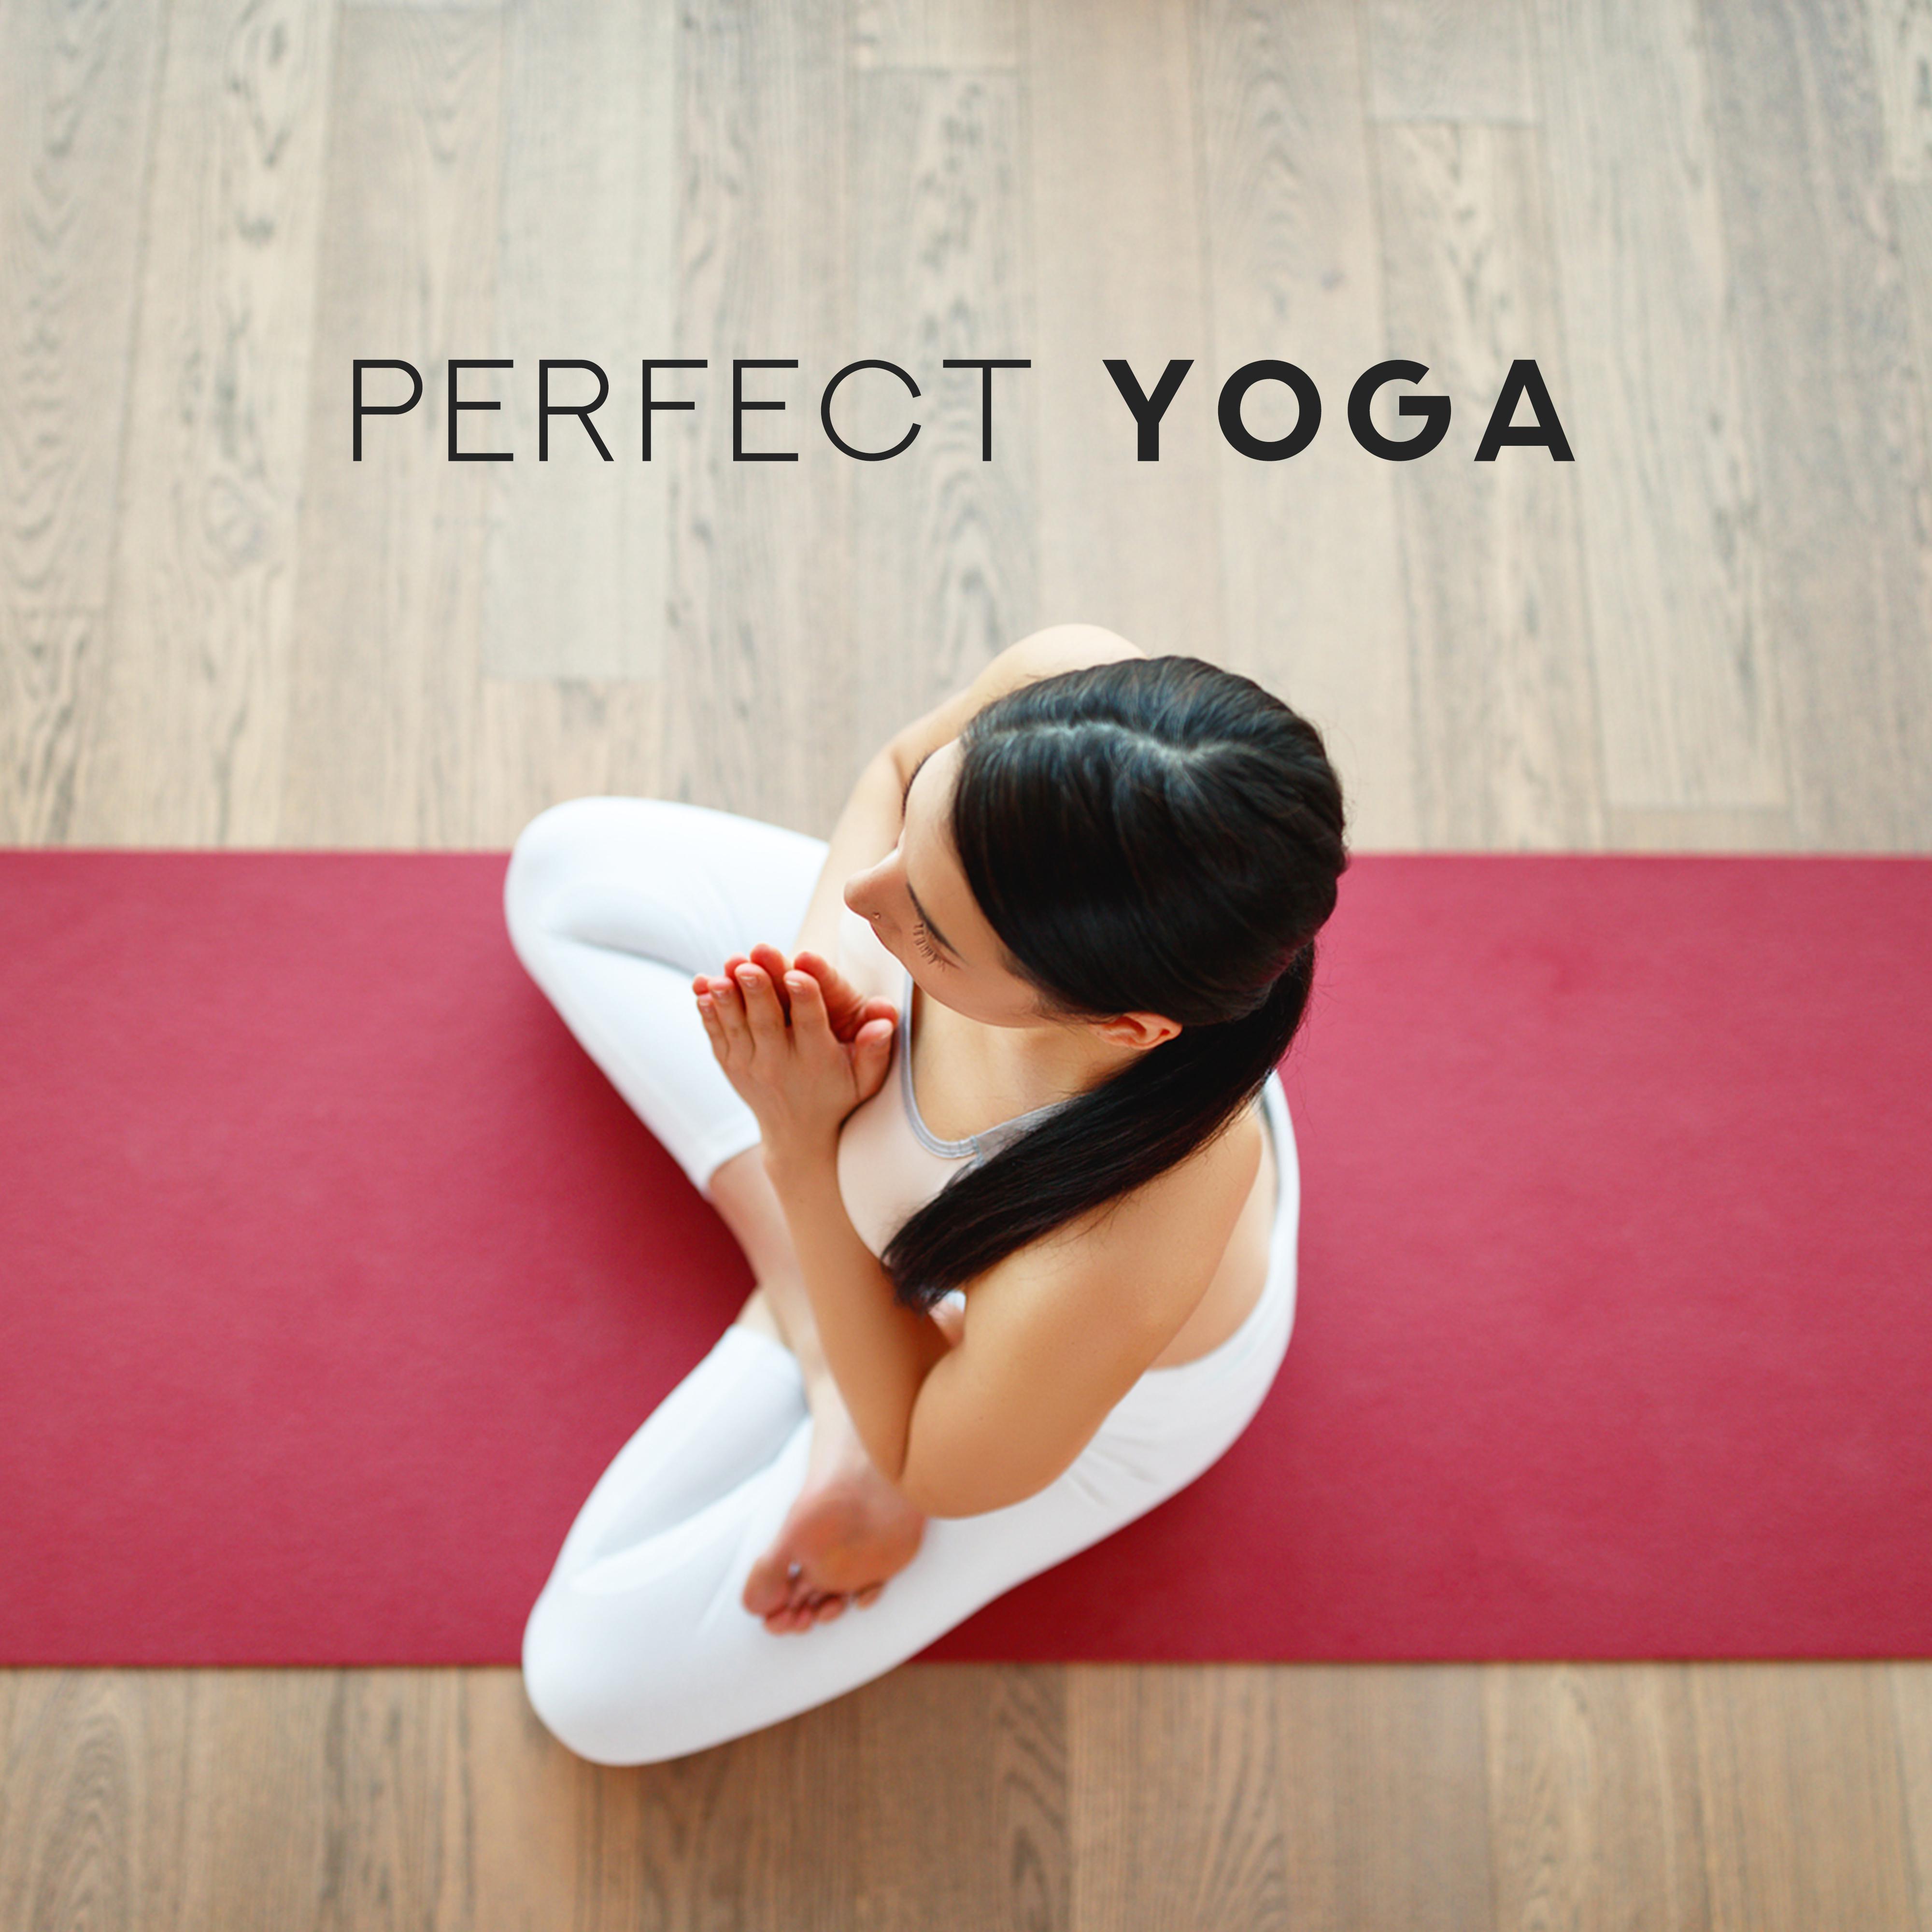 Perfect Yoga: Meditation Music for Rest, Mindfulness Relaxation, Yoga Practice, Music Zone, Asian Zen for Inner Focus, Lounge, Deep Harmony